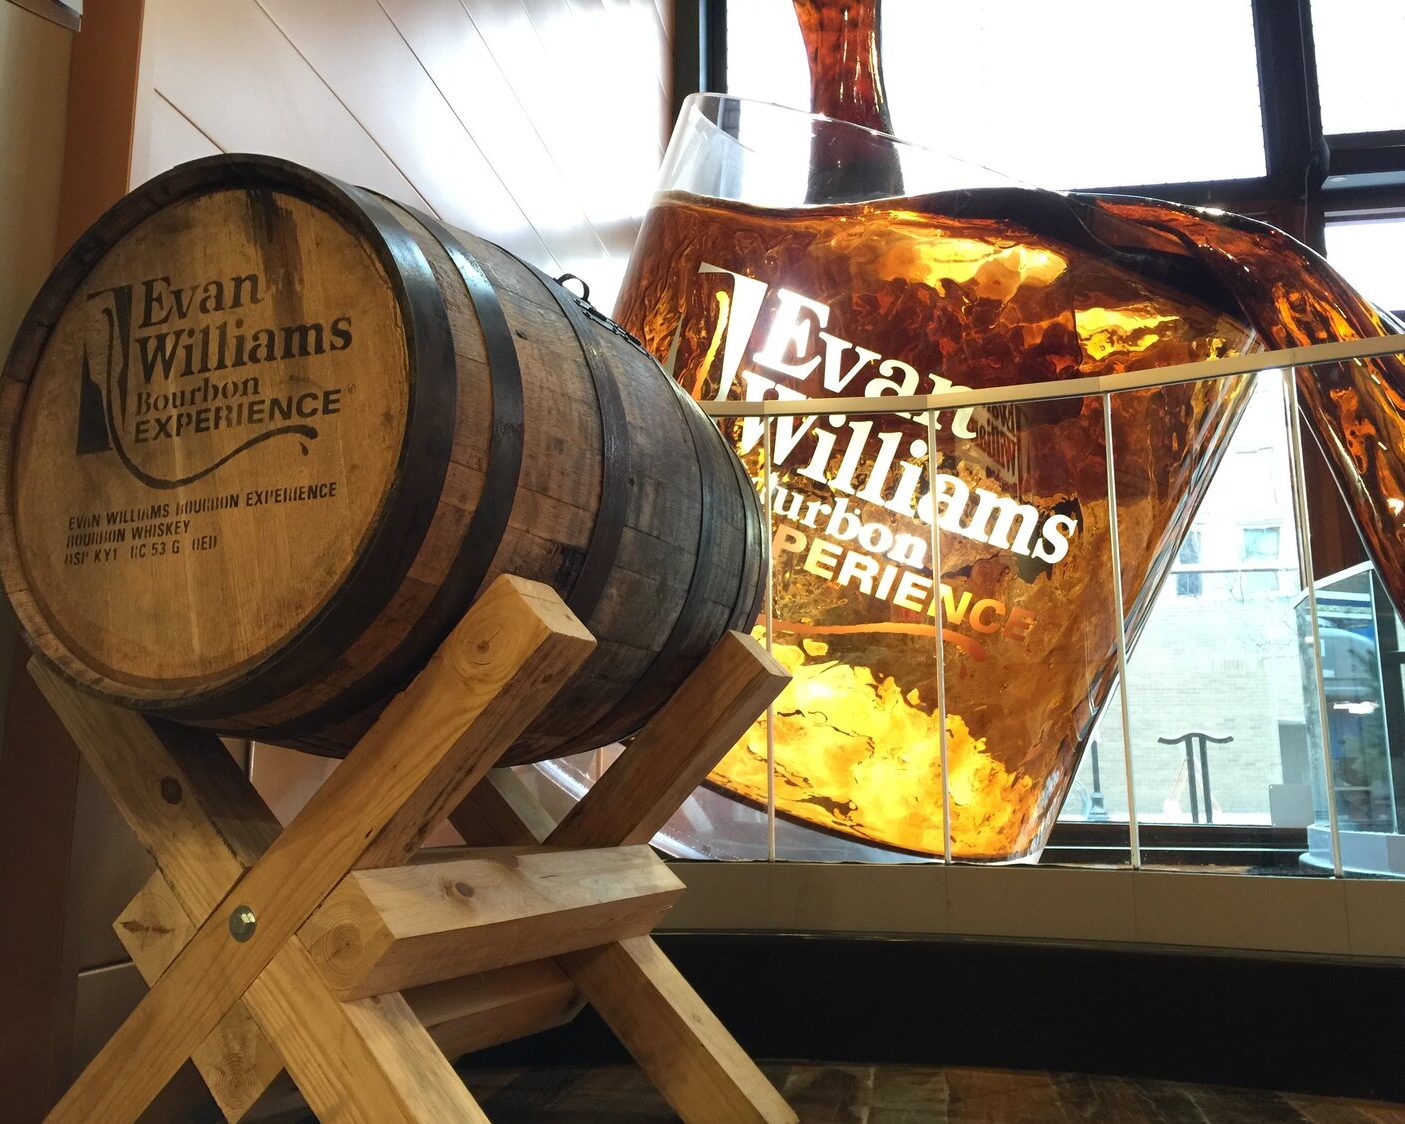 Evan Williams Bourbon Experience Marks 10th Anniversary with Special Release